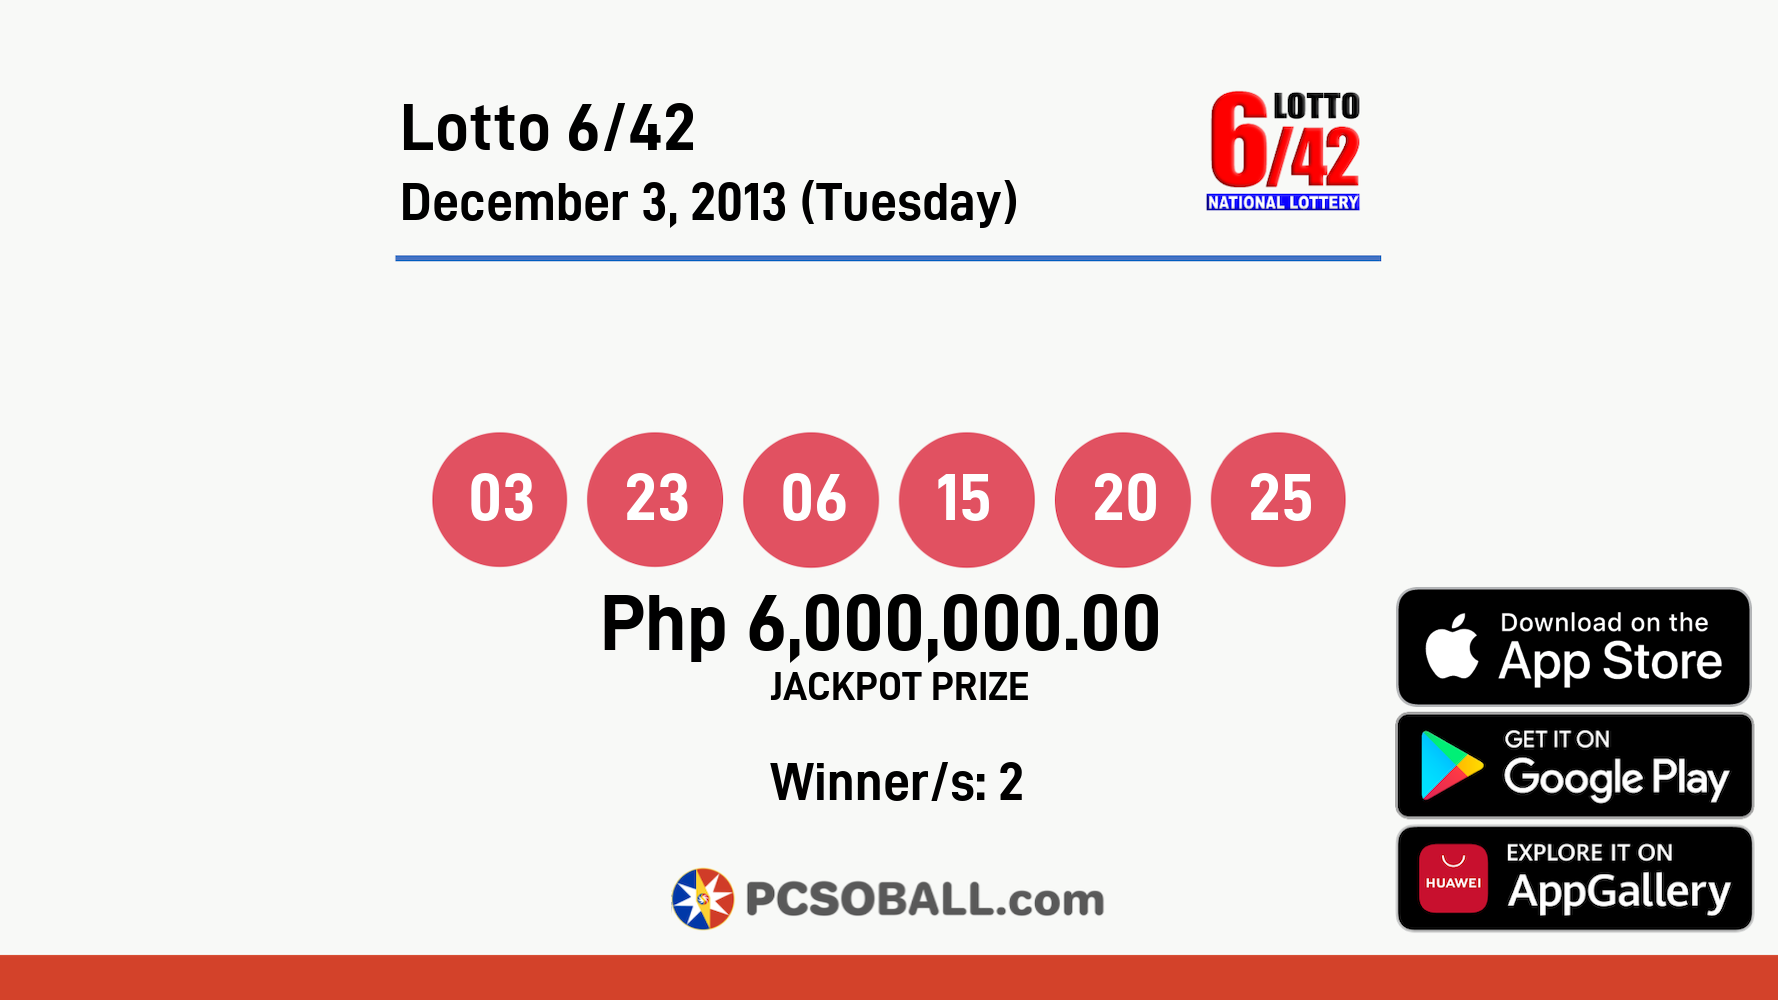 Lotto 6/42 December 3, 2013 (Tuesday) Result